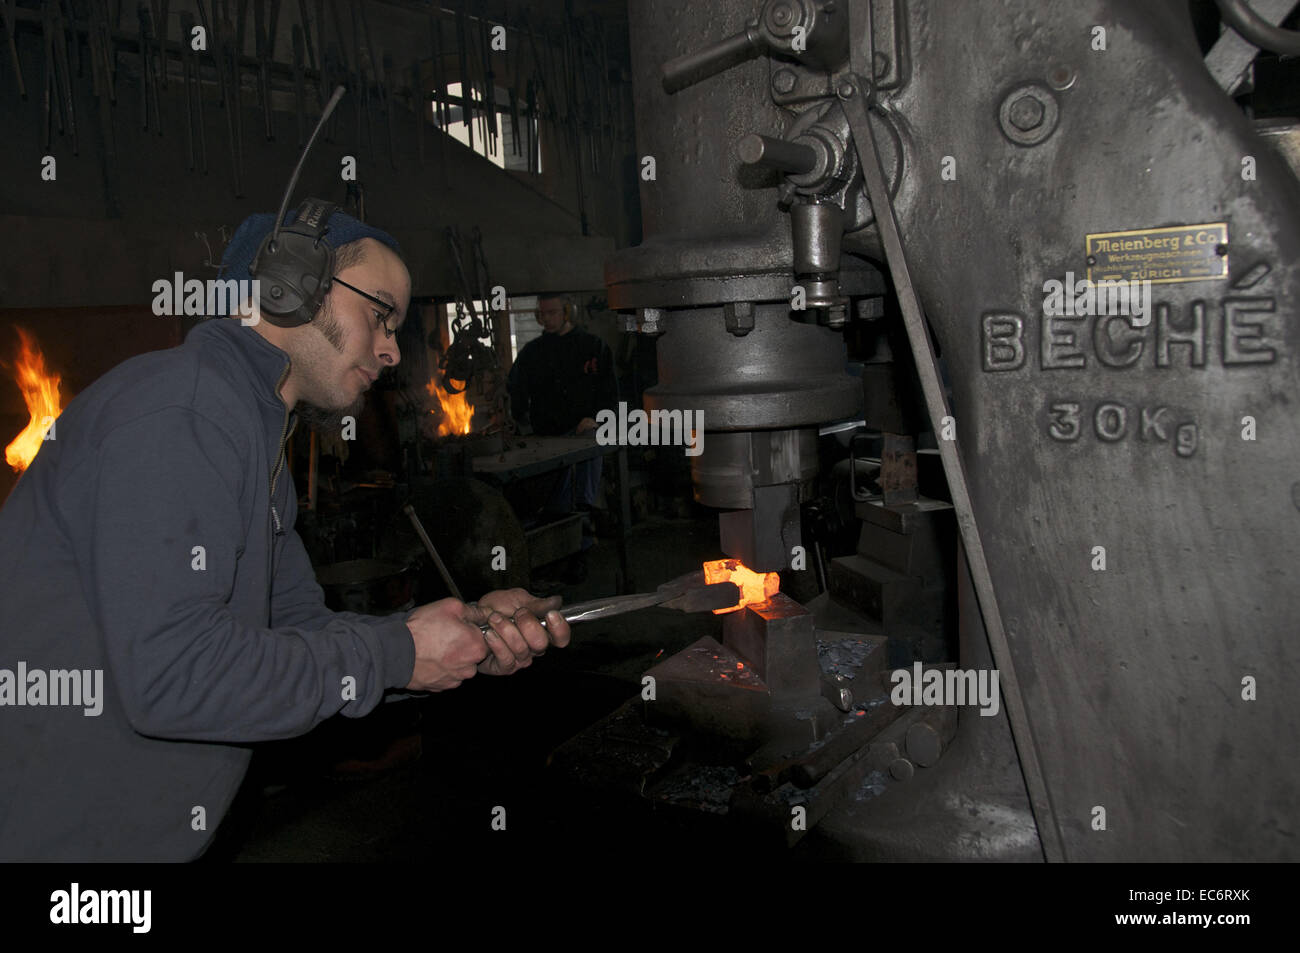 blacksmith working the steamhammer on redhot steel Stock Photo